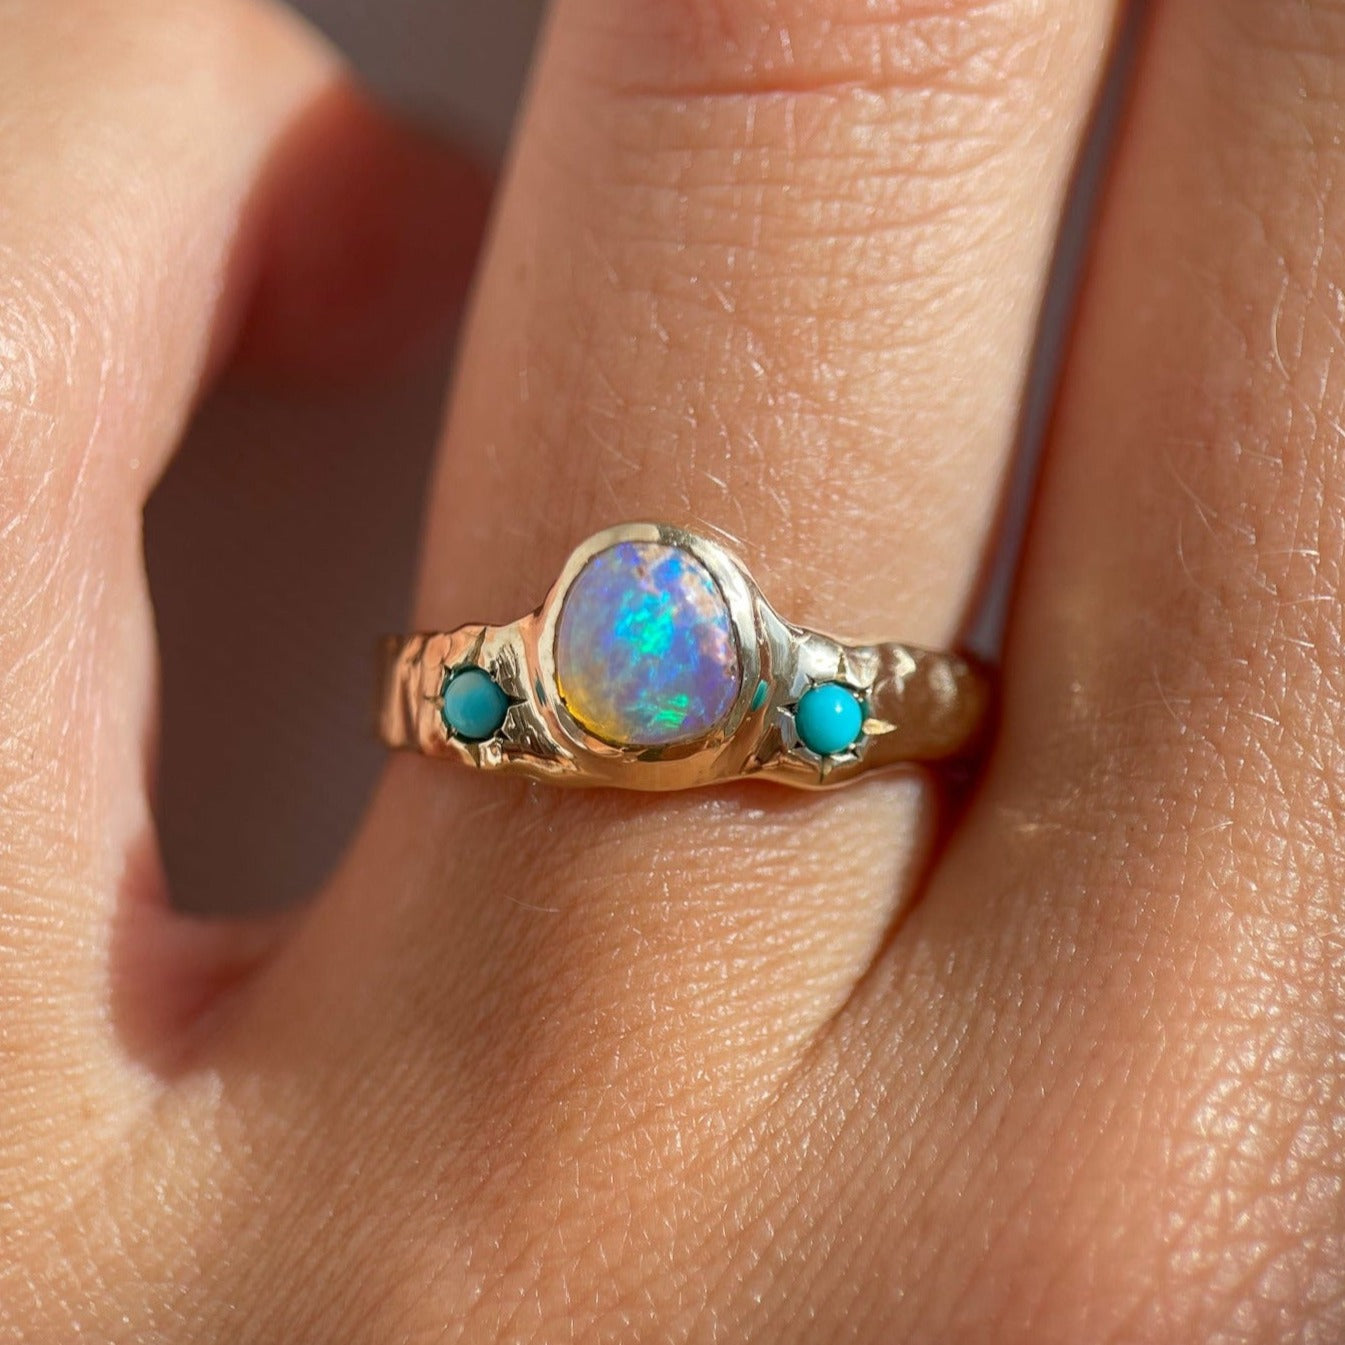 a wide gold band with a center opal and turquoise star settings is worn on a ring finger